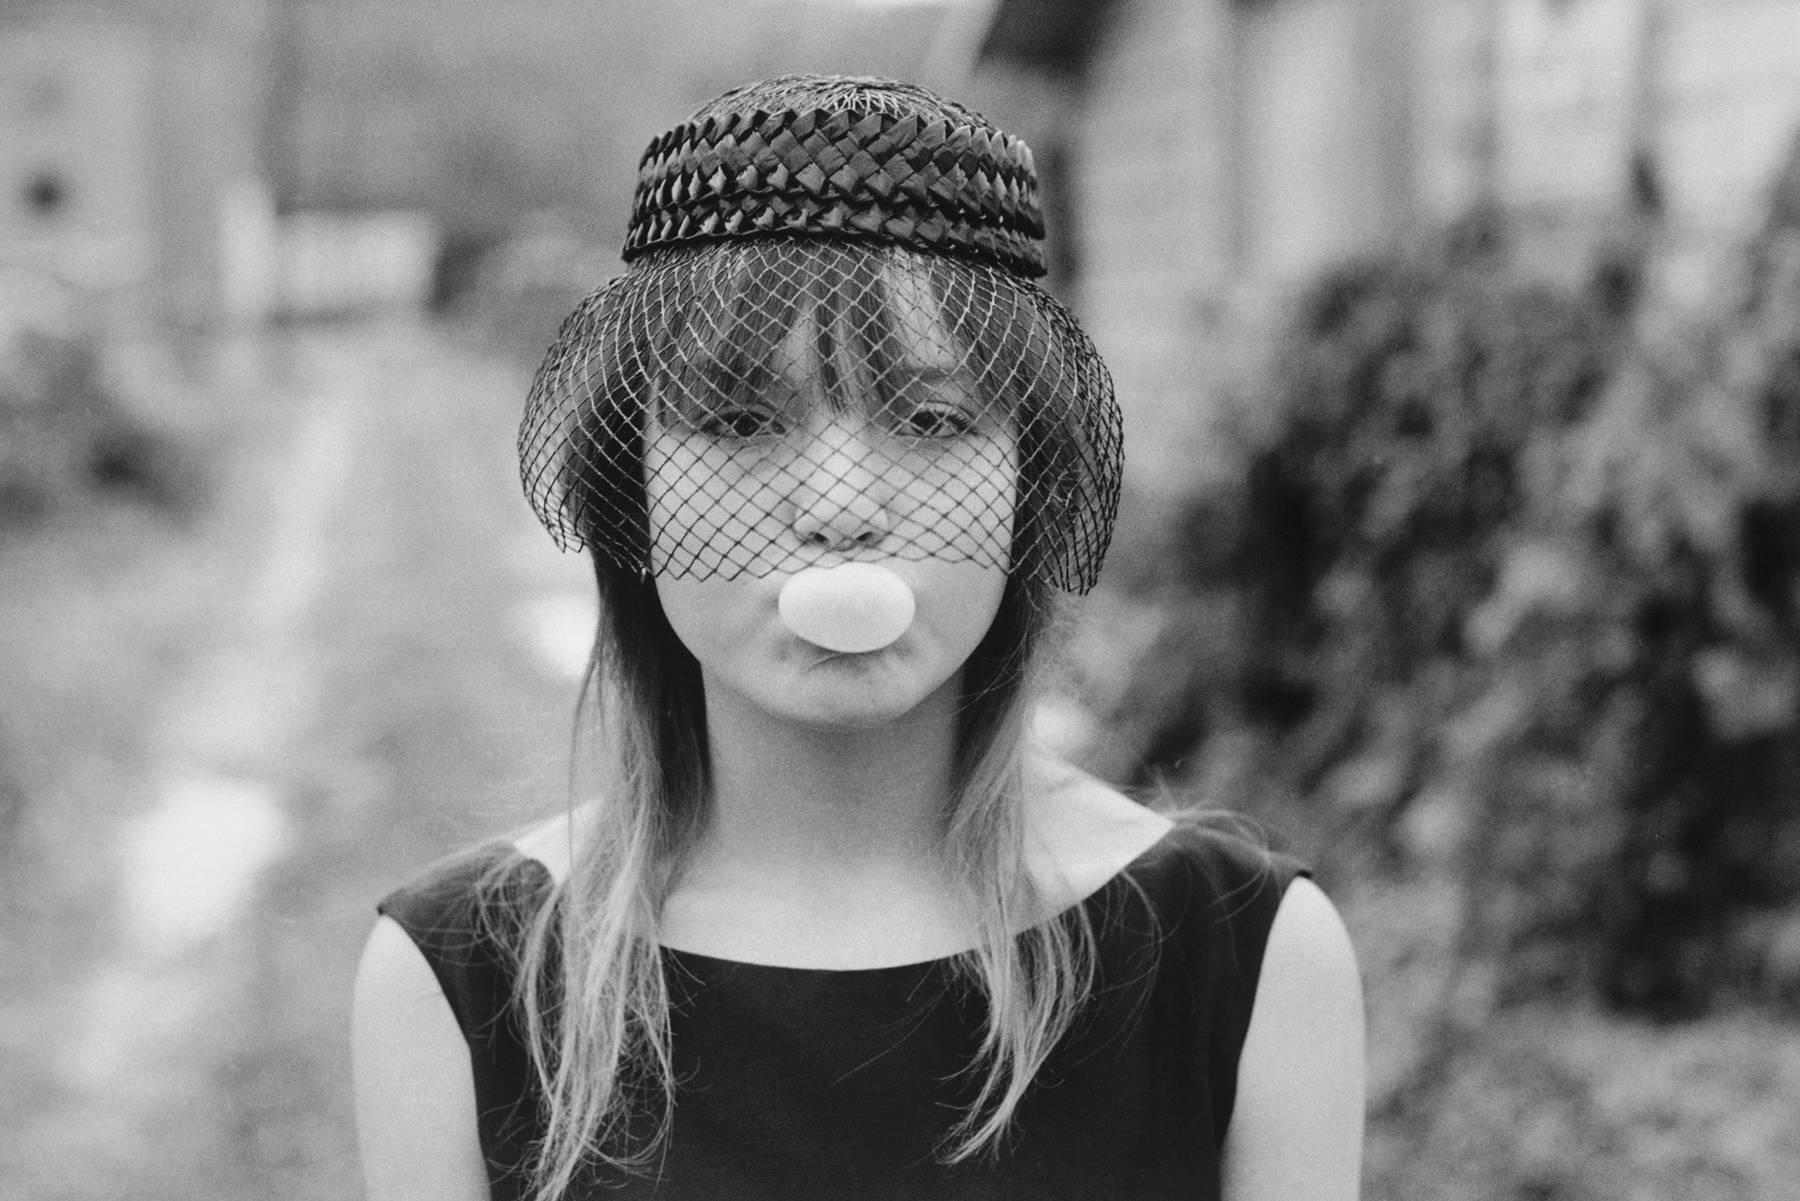 Mary Ellen Mark Black and White Photograph - Tiny blowing a bubble, Seattle, 1983